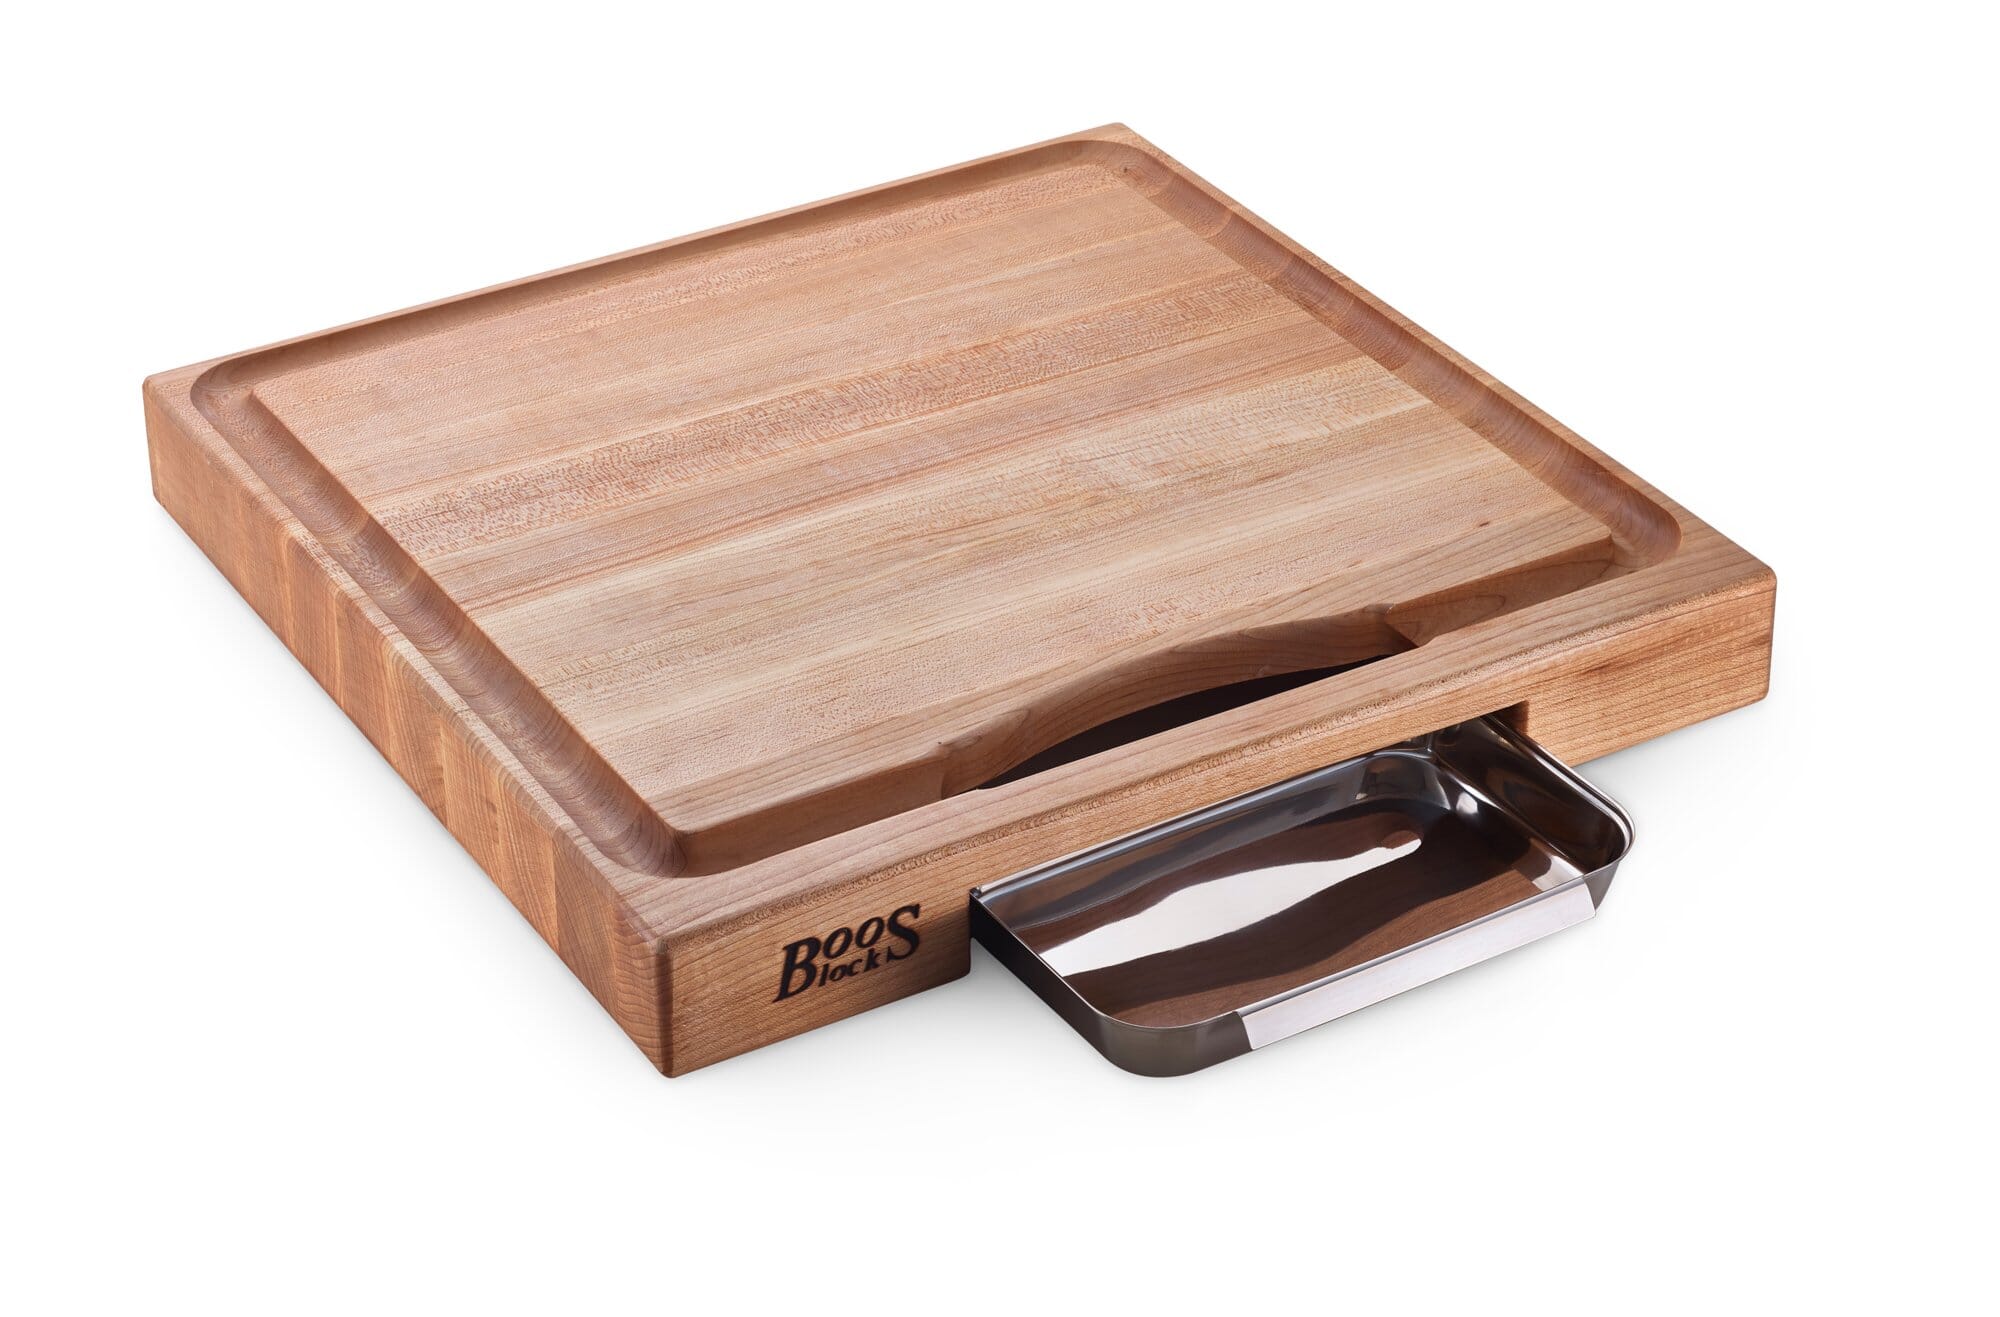 Best 3 Pieces Cutting board set with juice groove Manufacturer and Factory